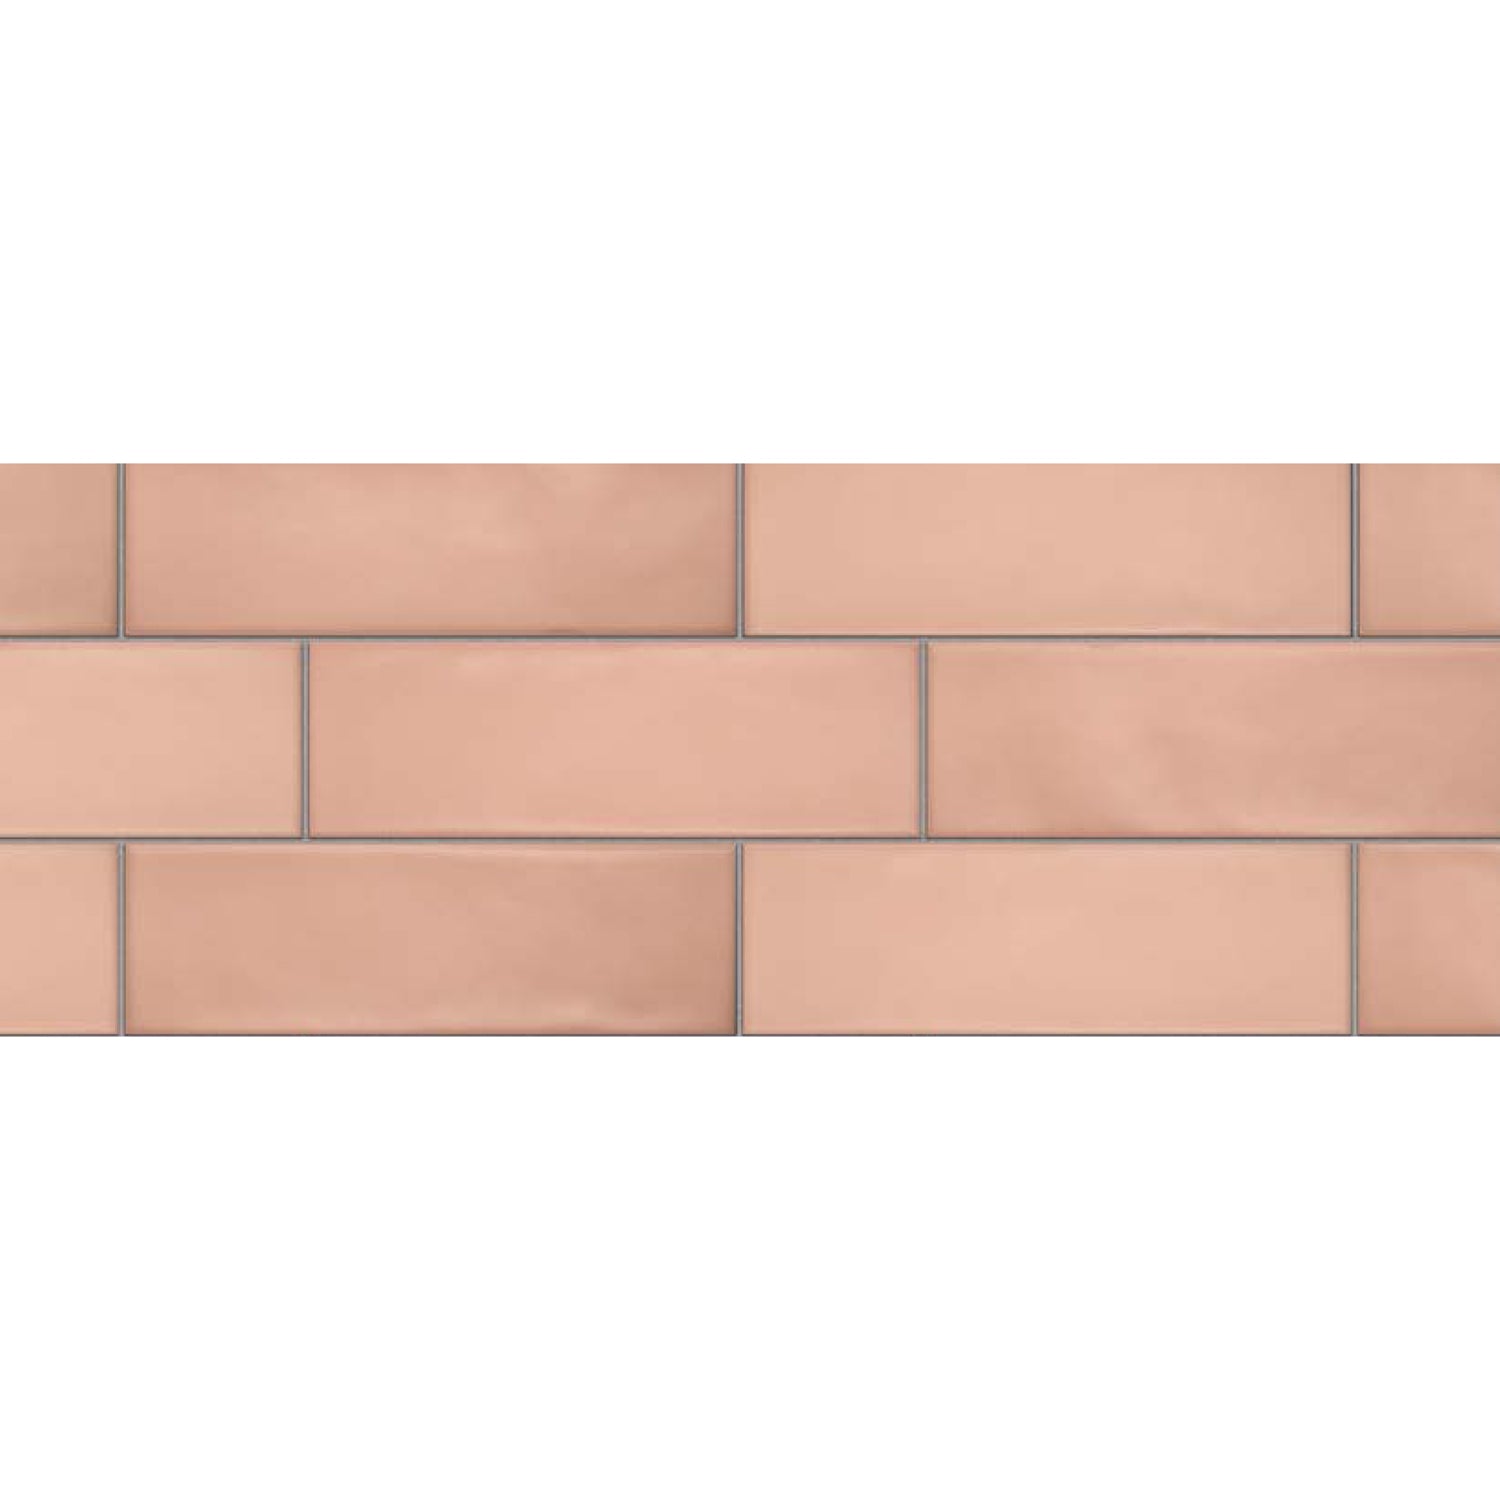 Topcu - Chalky - 2.5 in. x 8 in. Ceramic Wall Tile - Nude